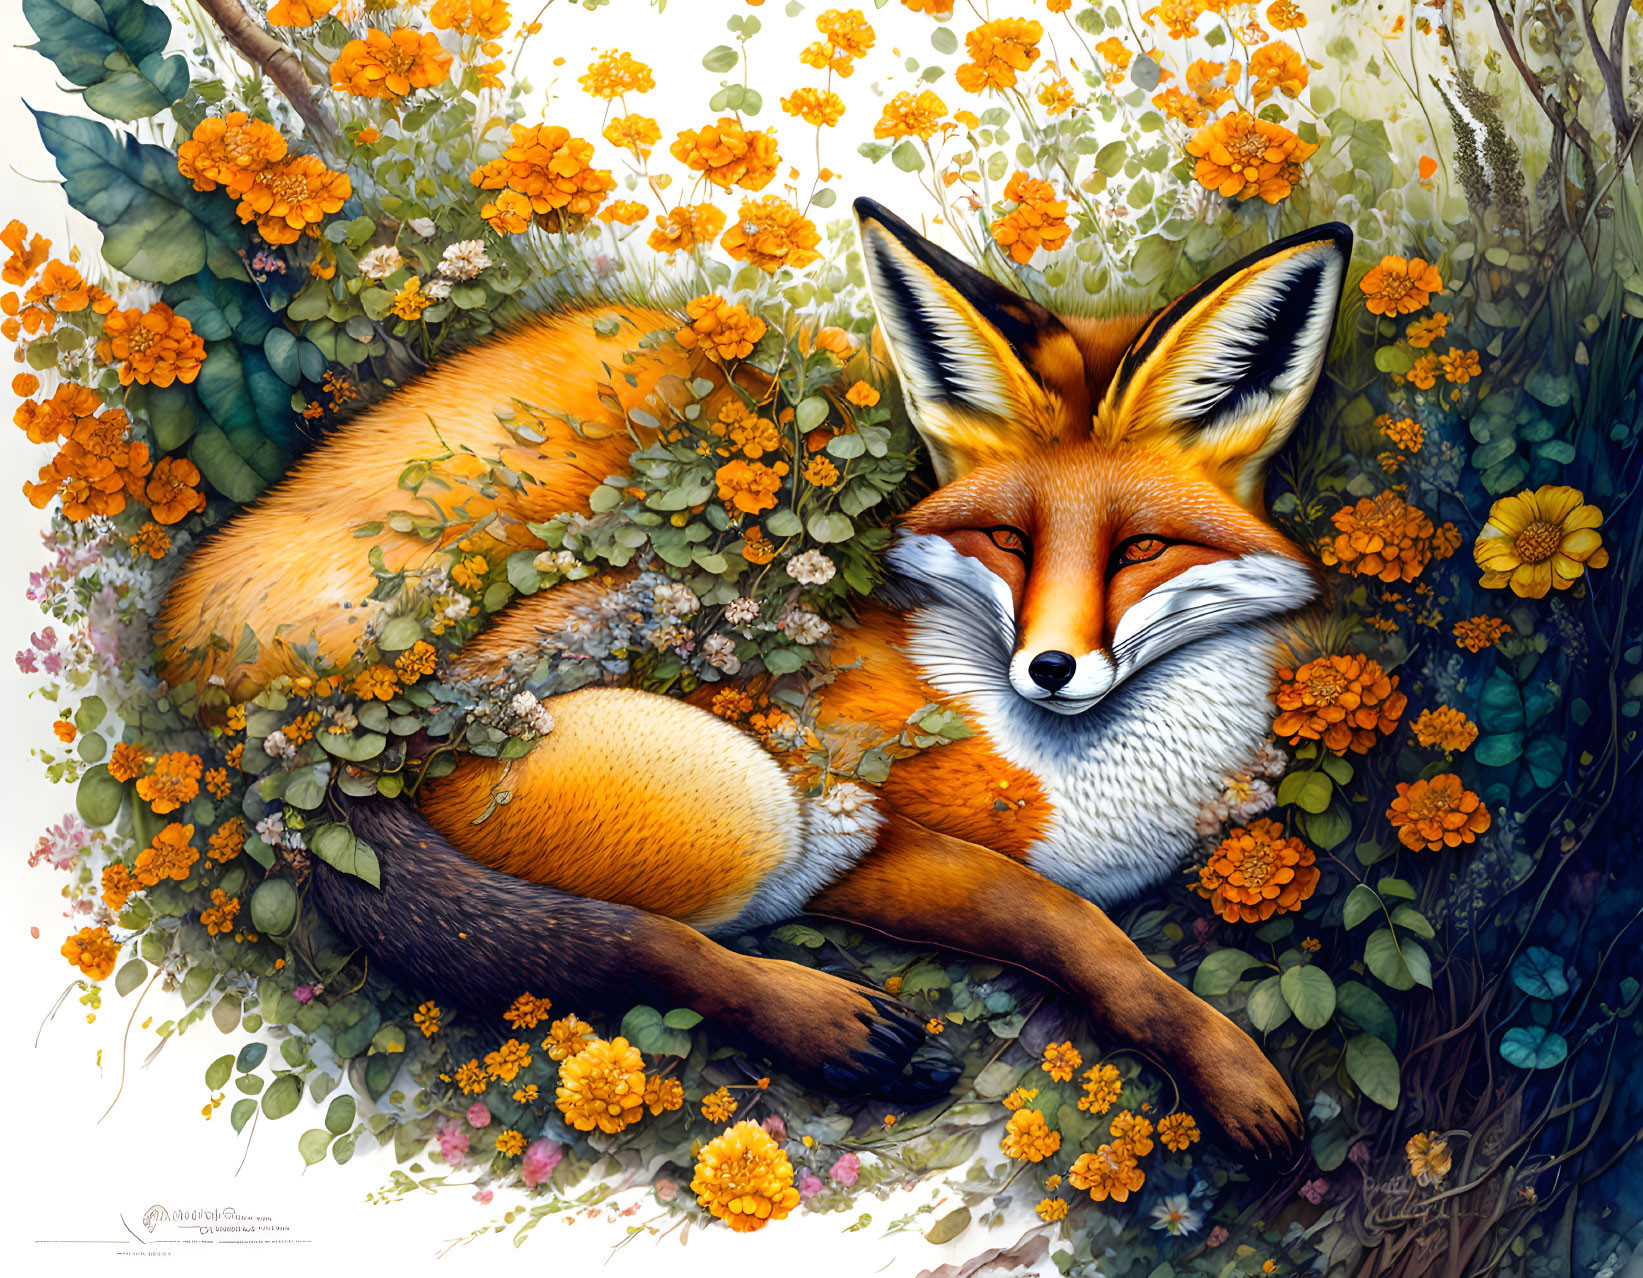 Fox in Greenery with Orange Flowers - Detailed Illustration